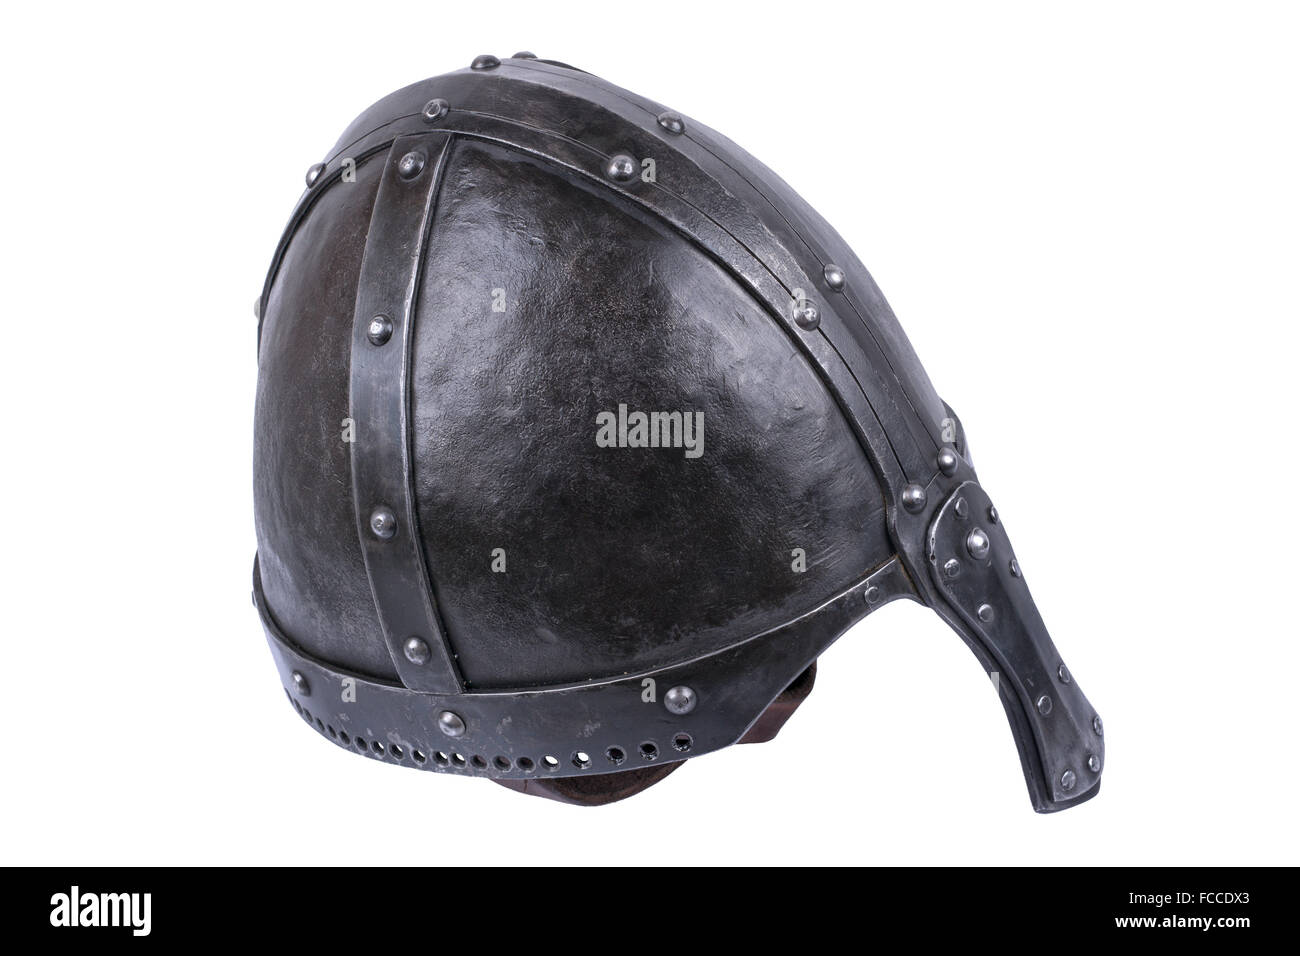 Heavy duty conical norman helmet isolated on a white background Stock Photo